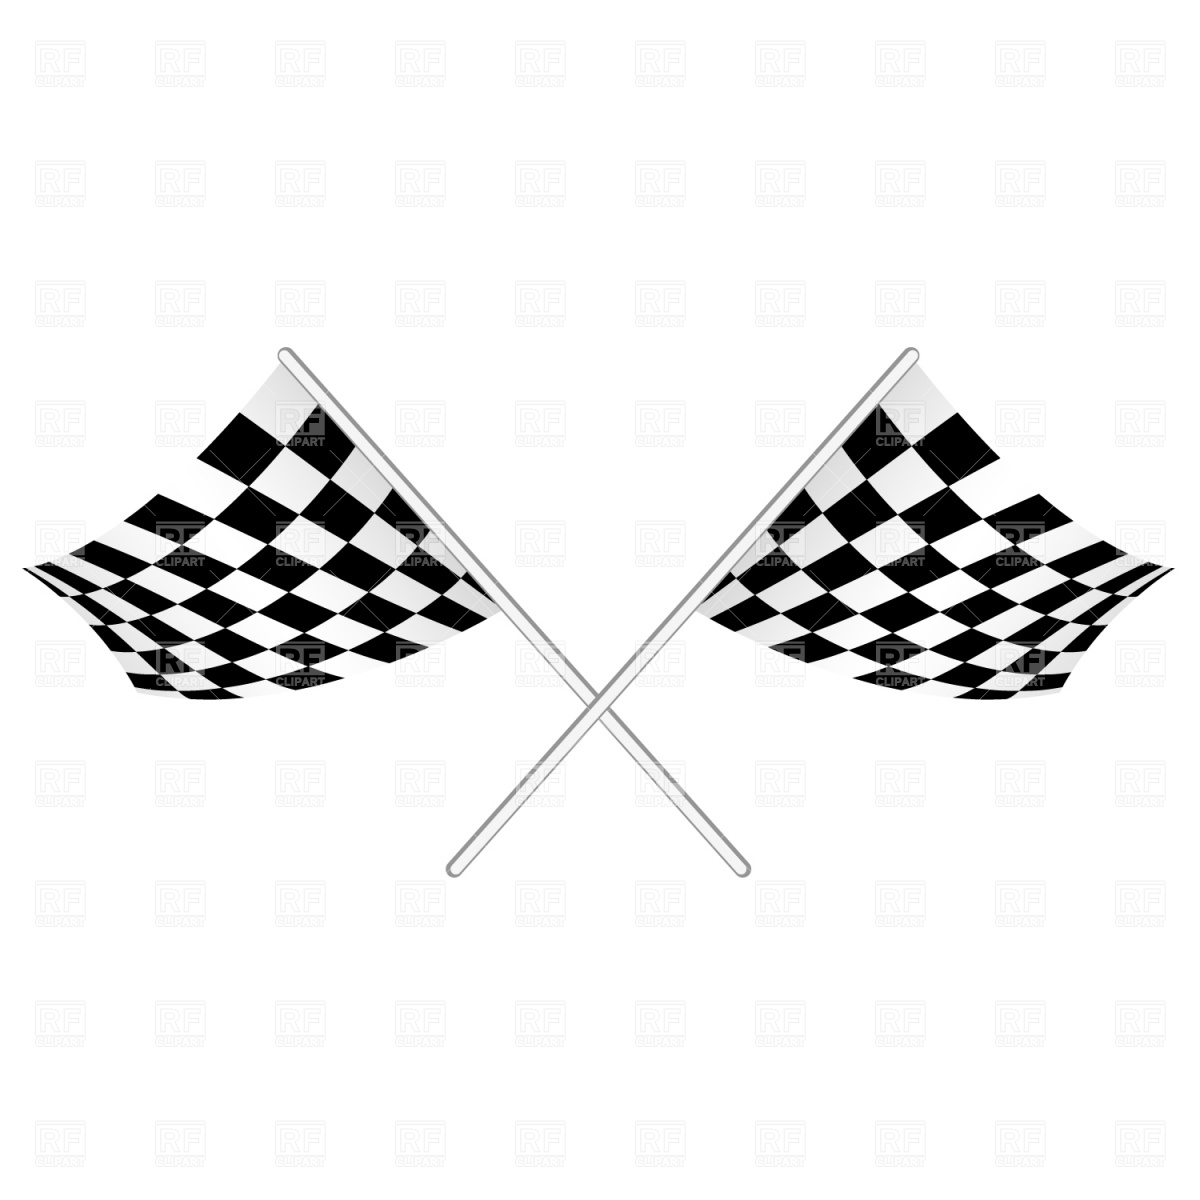 Checked Start Flag 1481 Signs Symbols Maps Download Royalty Free    